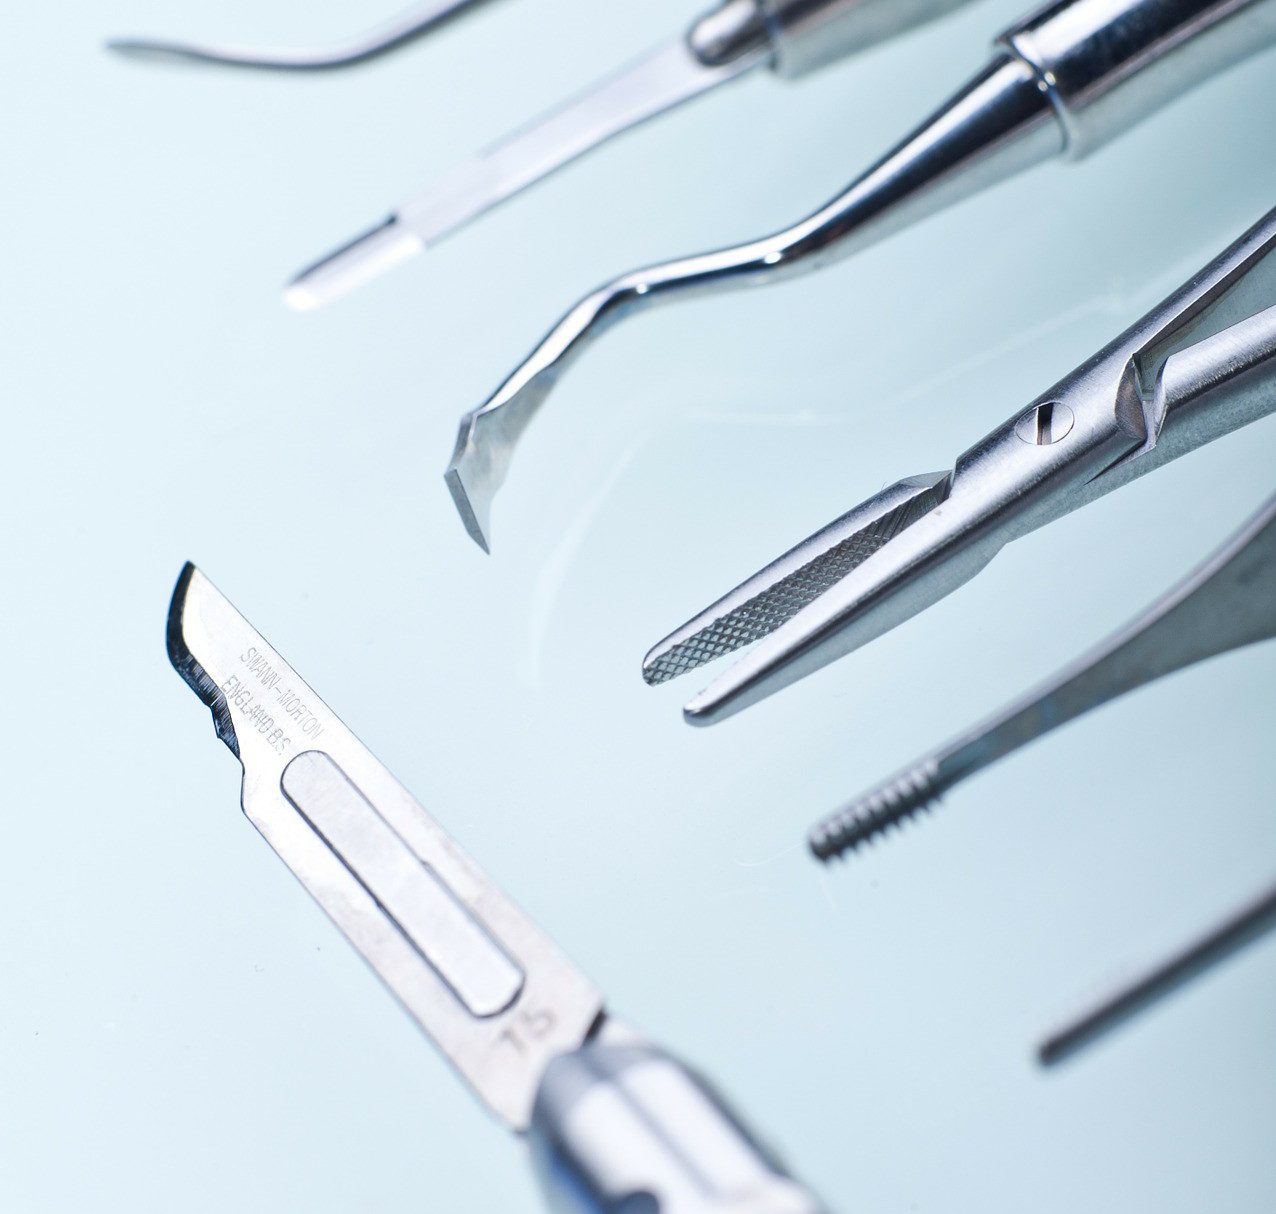 Global Dental Surgical Devices And Equipment Market Report 2021 – Opportunities And Strategies, Market Forecast And Trends